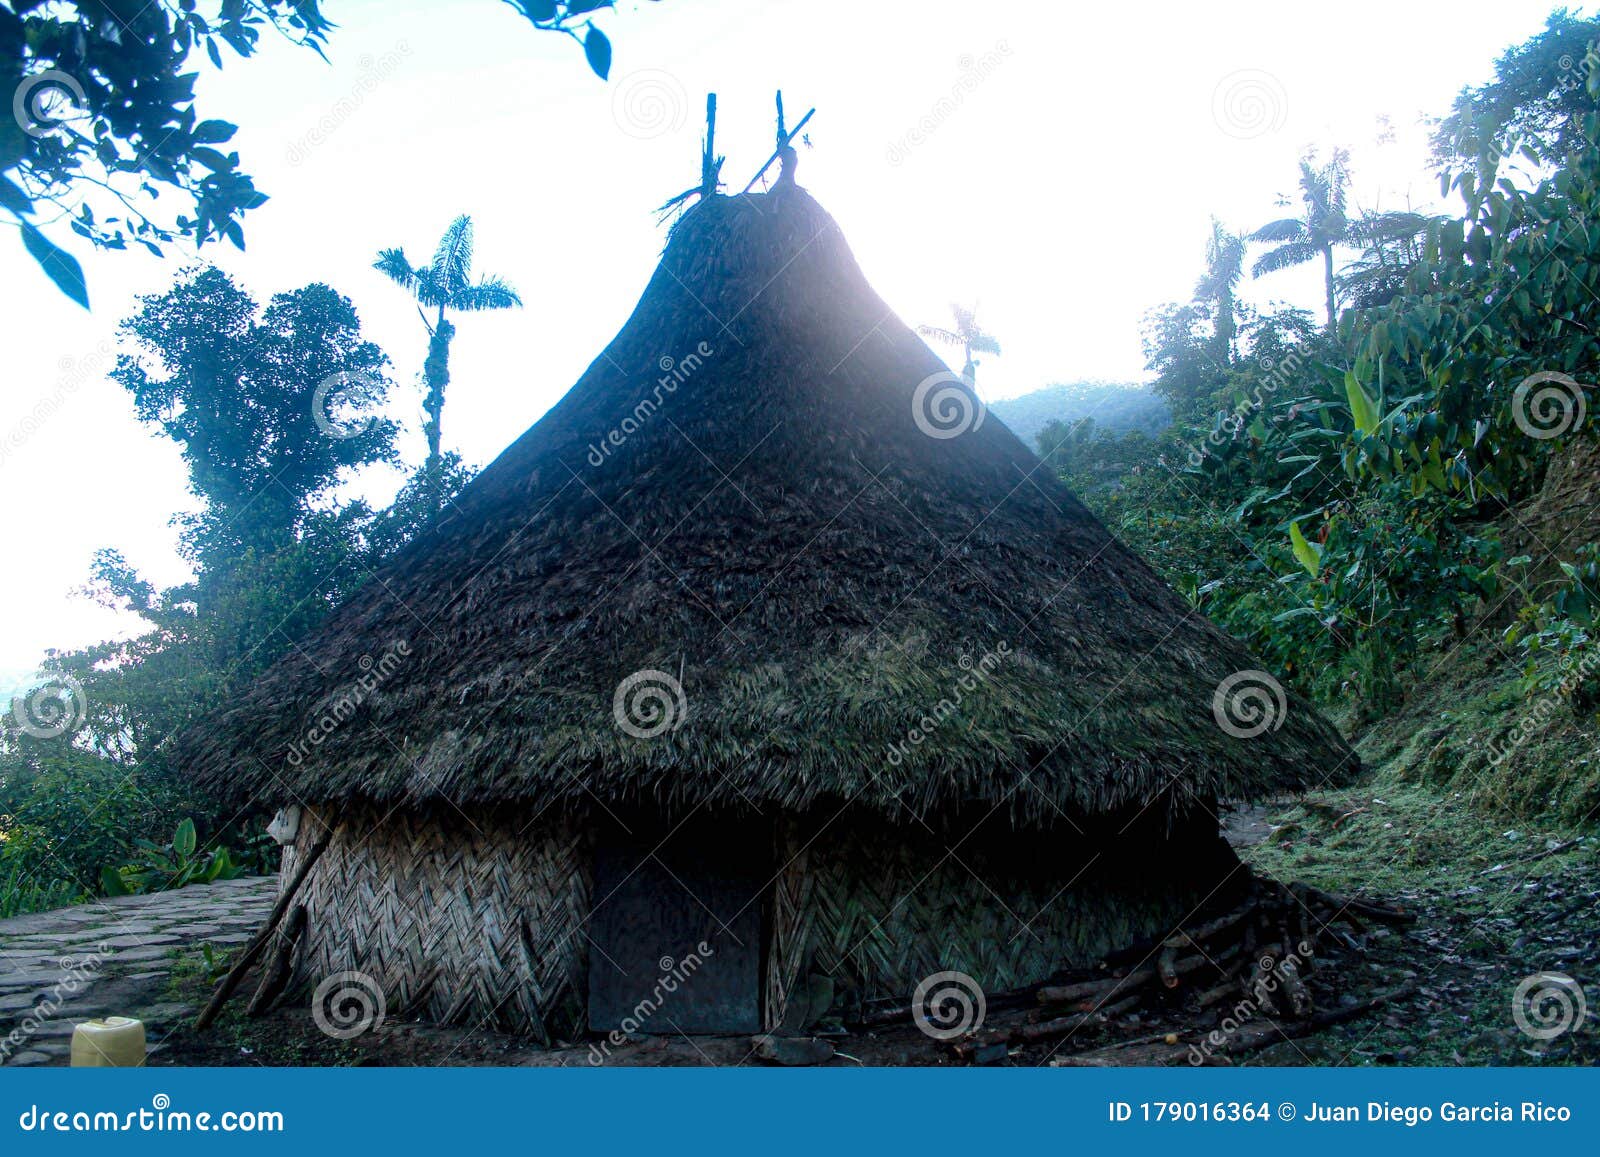 indigenous house in lost city